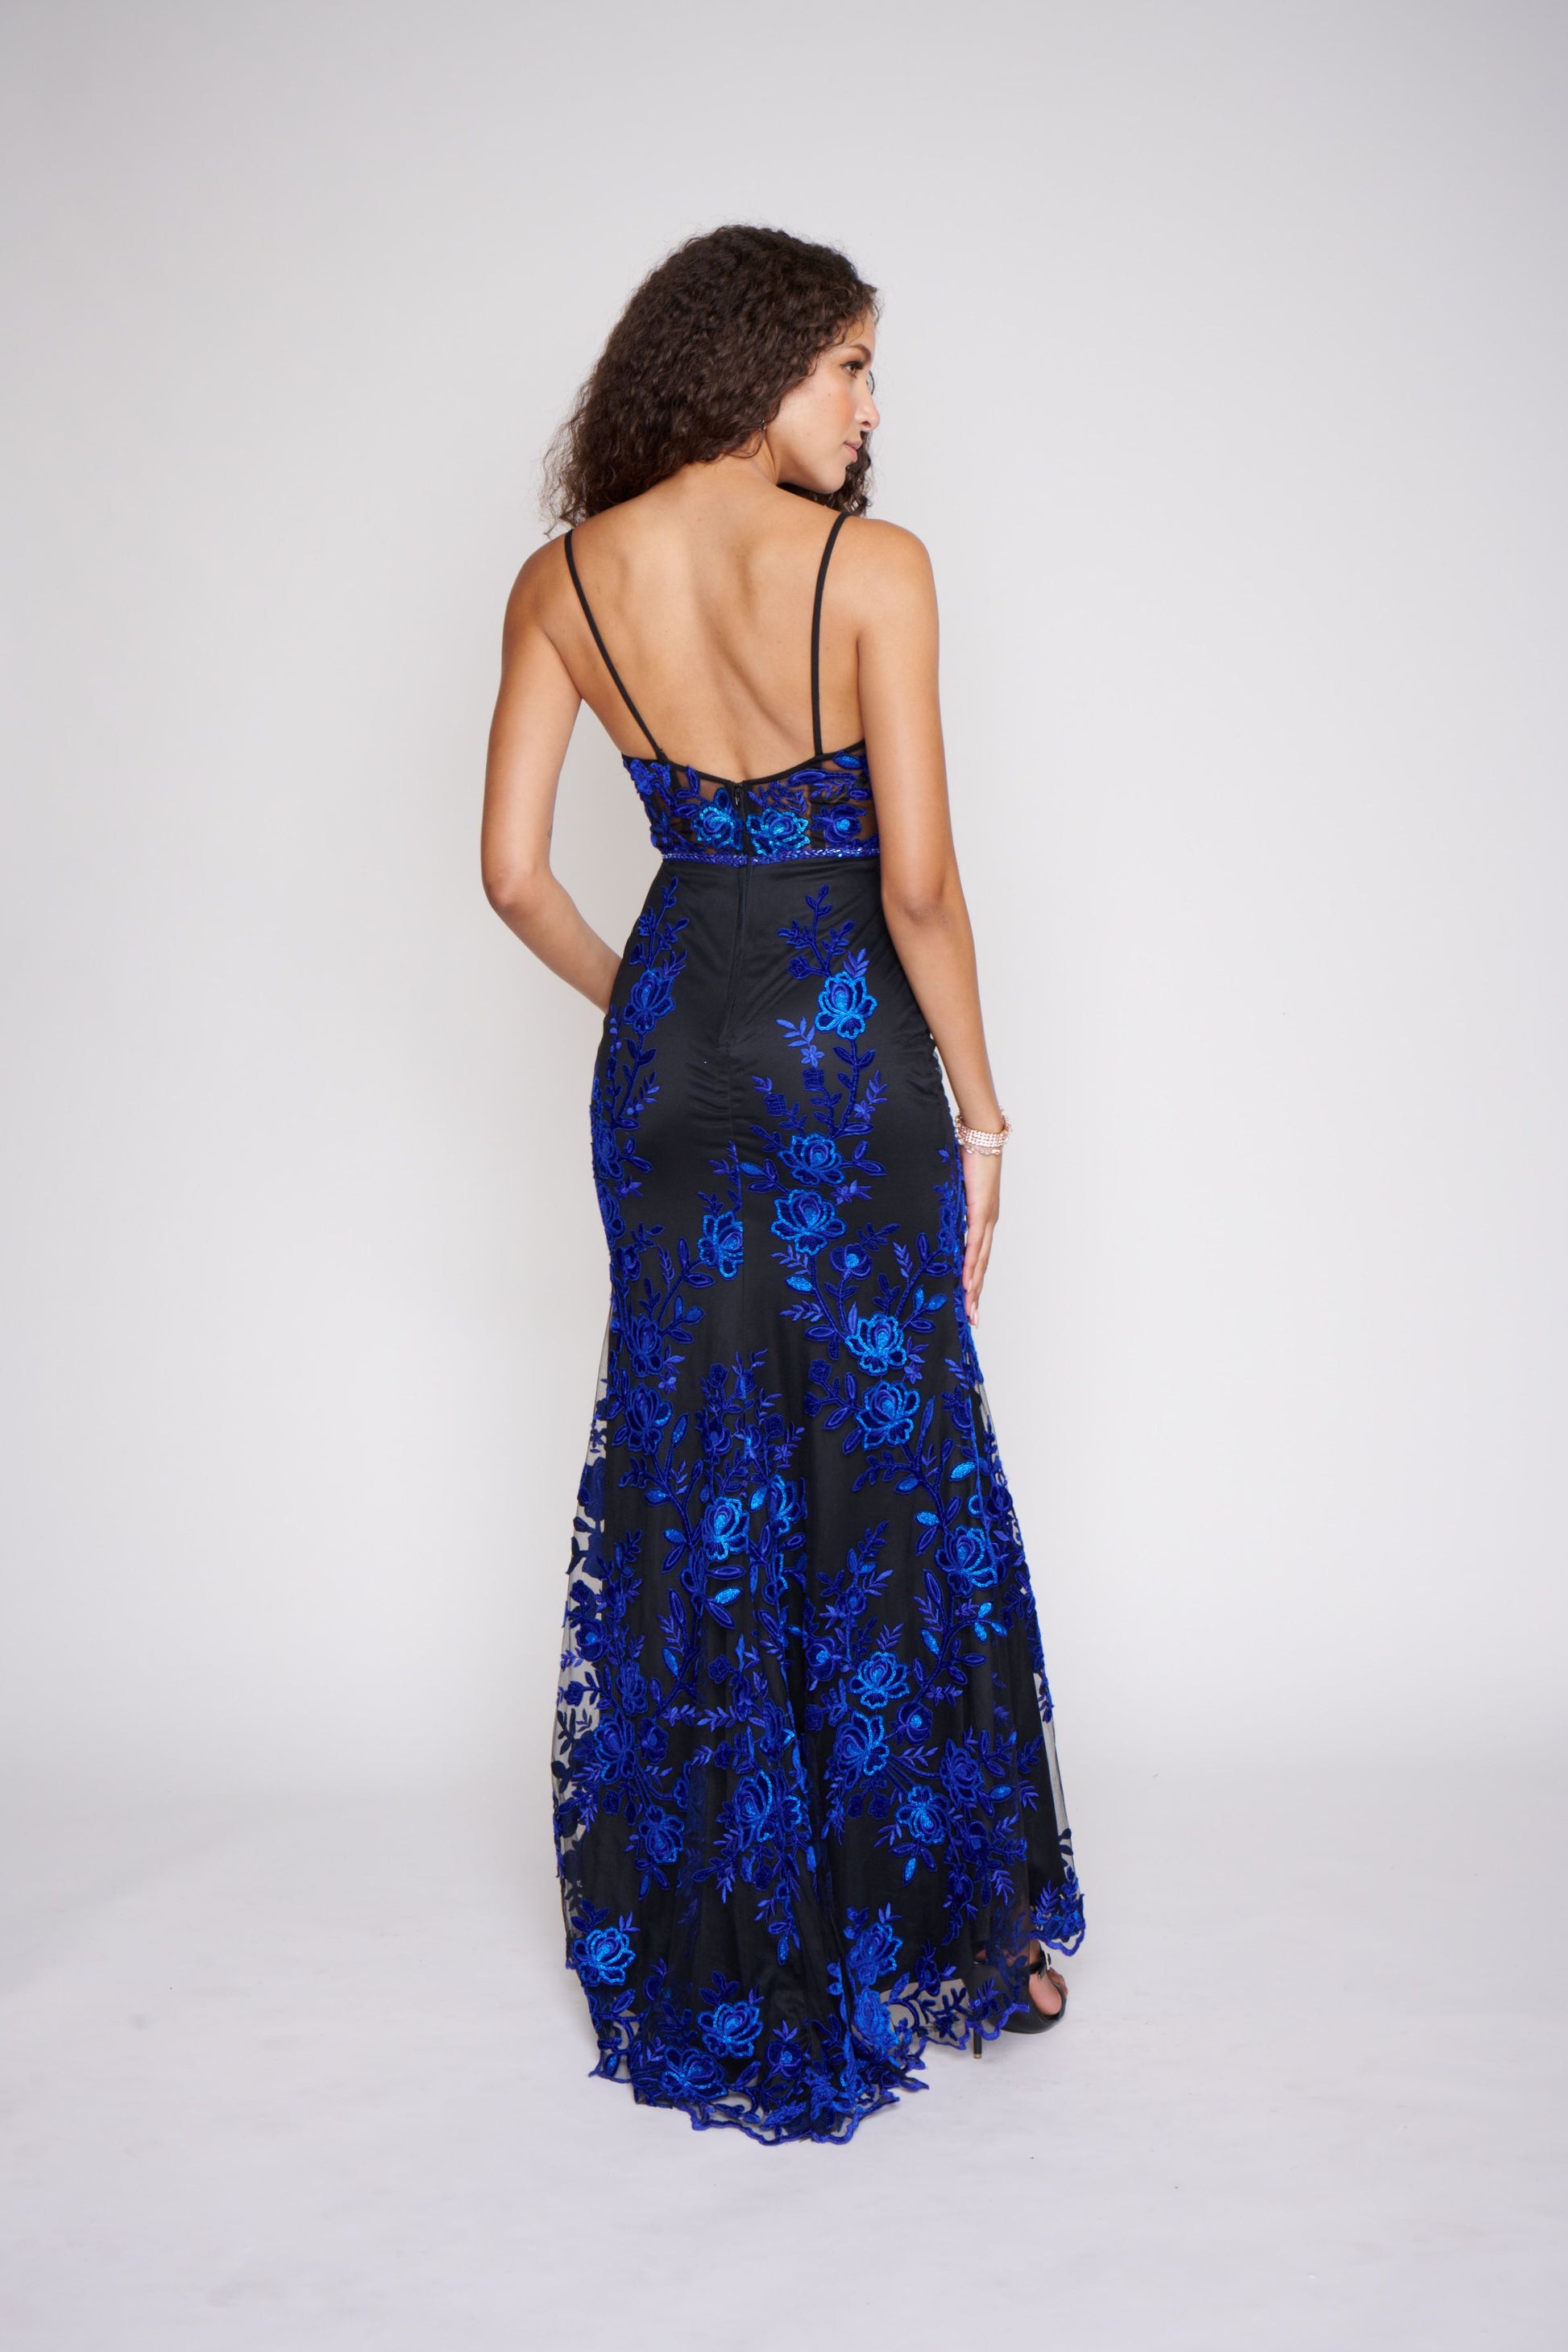 Nina Canacci 2240 Black Royal Long Prom Dress Evening Gown Fit and Flare Floral Lace Dress.  This dress is black with royal blue applique lace through out the dress.  It has a v neckline with sheer panel and a sheer lace back.  The long skirt is a fit and flare style. 